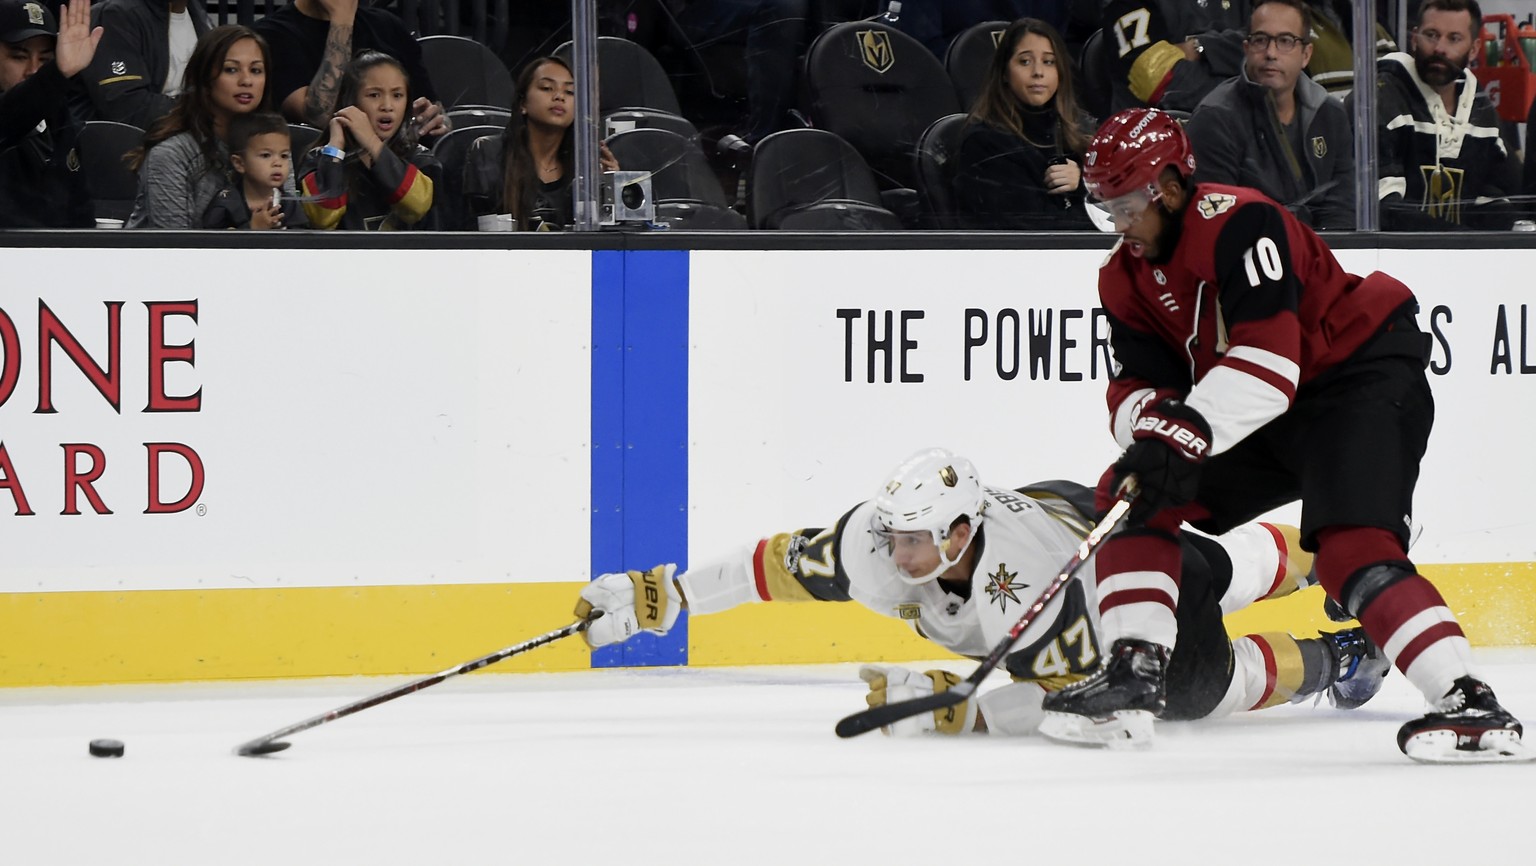 Vegas Golden Knights defenseman Luca Sbisa (47) dives for the puck with pressure from Arizona Coyotes left wing Anthony Duclair during the first period of an NHL hockey game, Sunday, Dec. 3, 2017, in  ...